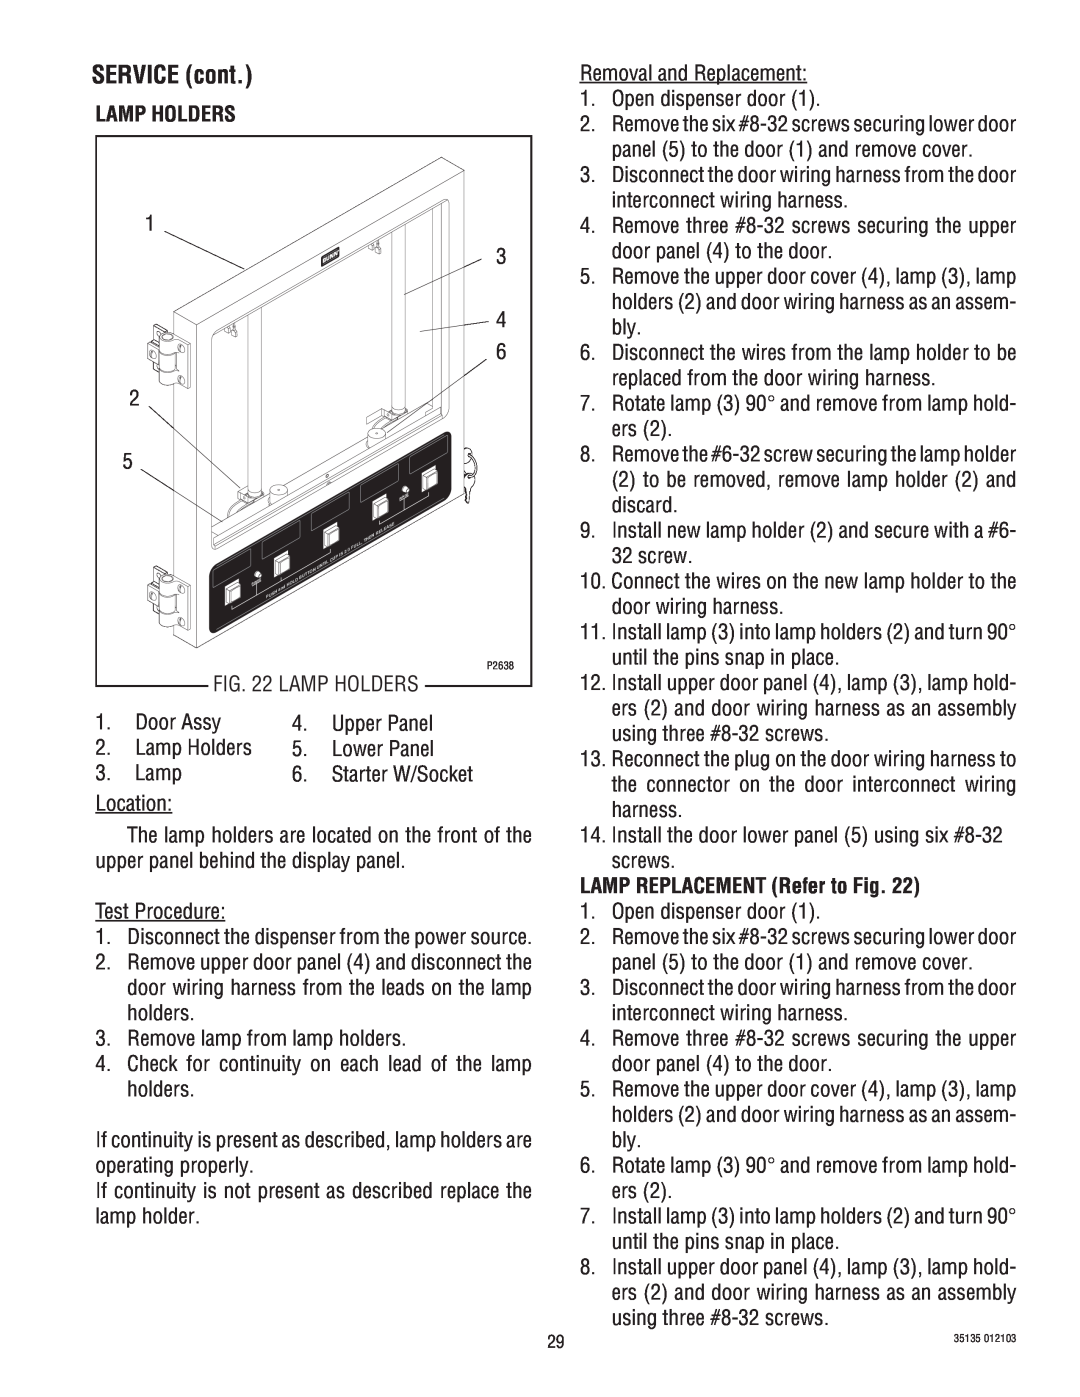 Bunn FMD-4, FMD-5 service manual Lamp Holders, LAMP REPLACEMENT Refer to Fig, SERVICE cont 